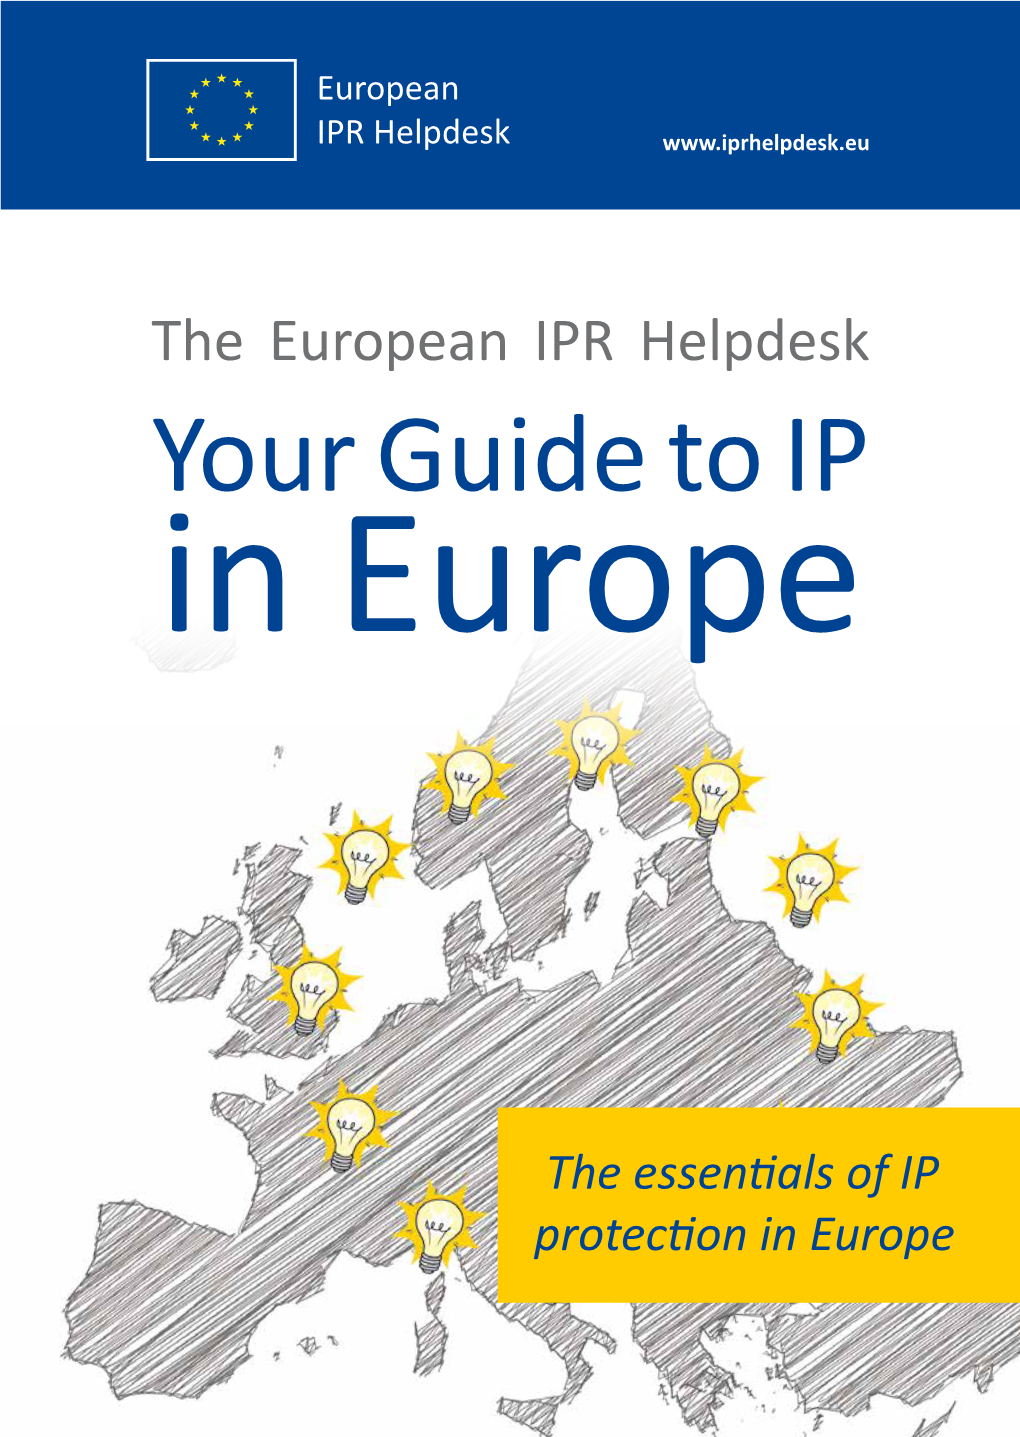 The European IPR Helpdesk Your Guide to IP in Europe